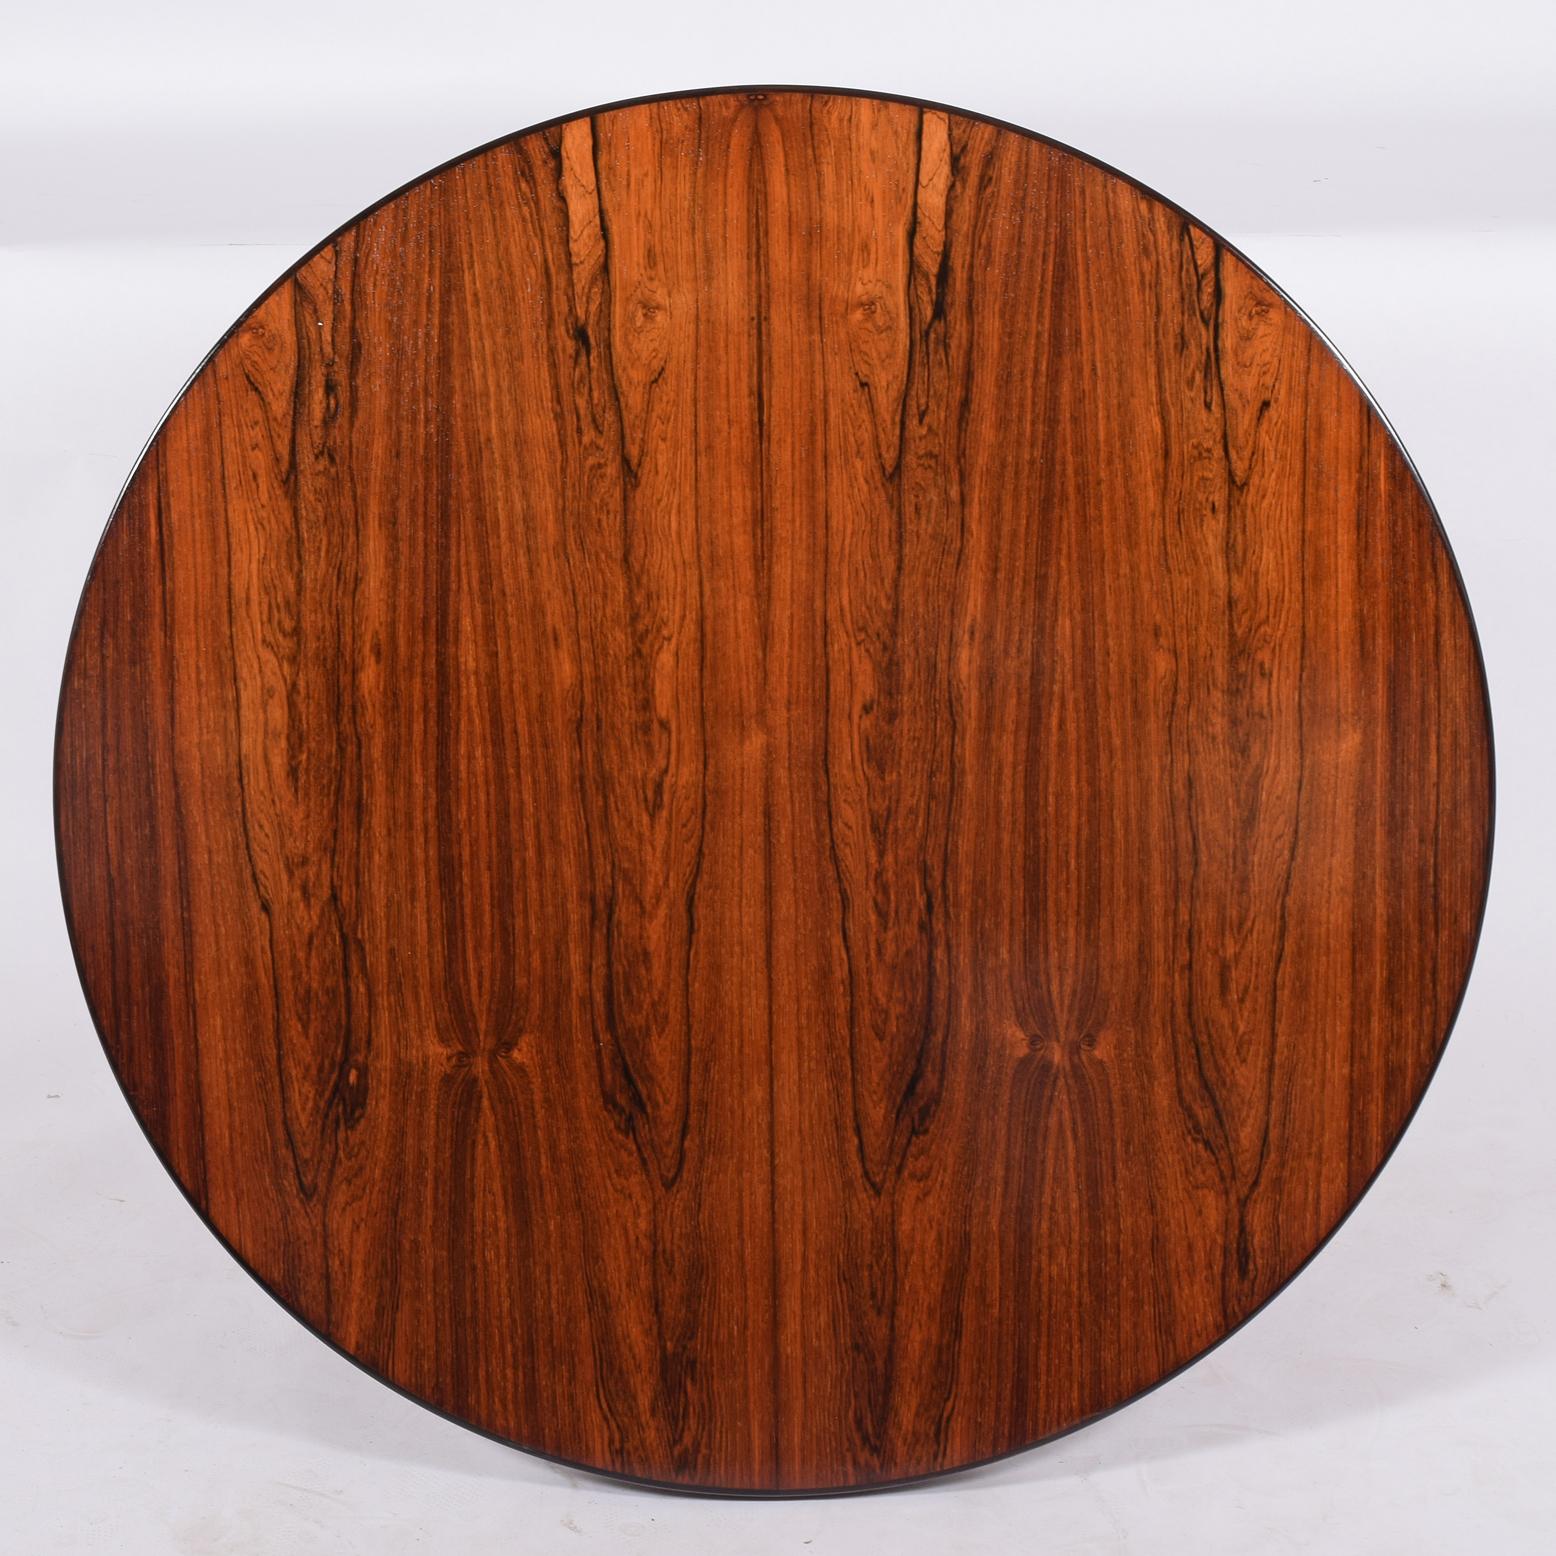 Ole Wanscher design occasional table in Brazilian rosewood paper label from cabinet maker Iversen.